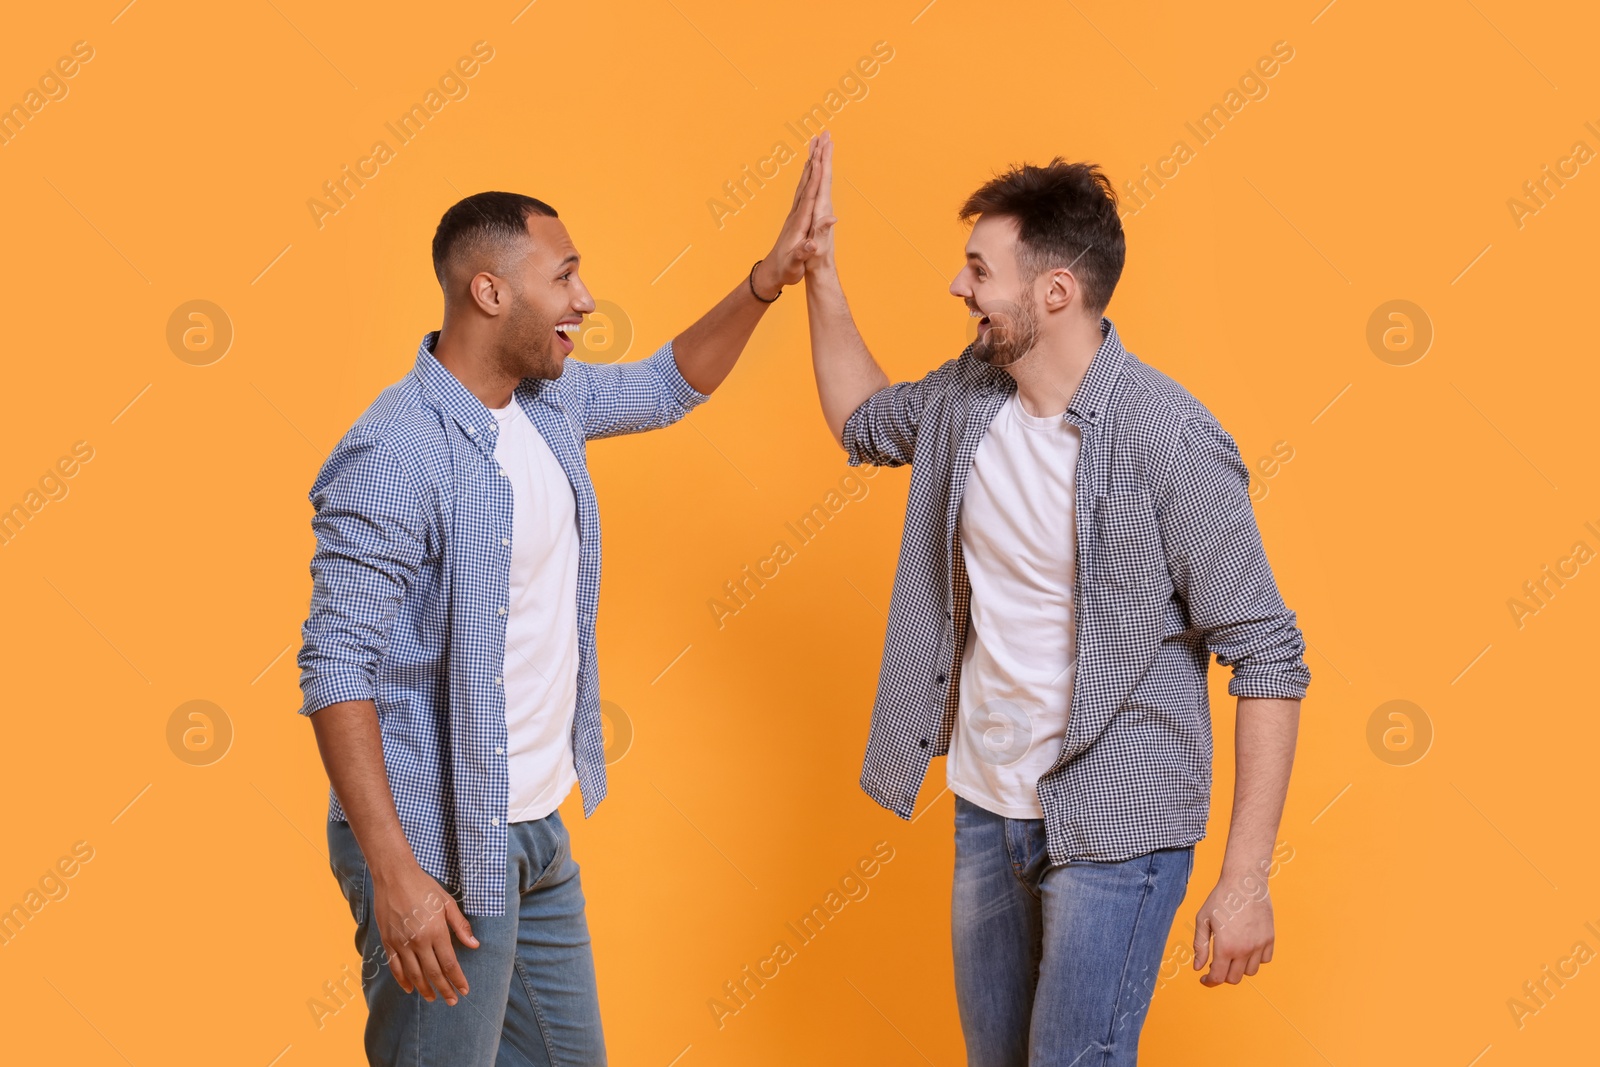 Photo of Men giving high five on yellow background